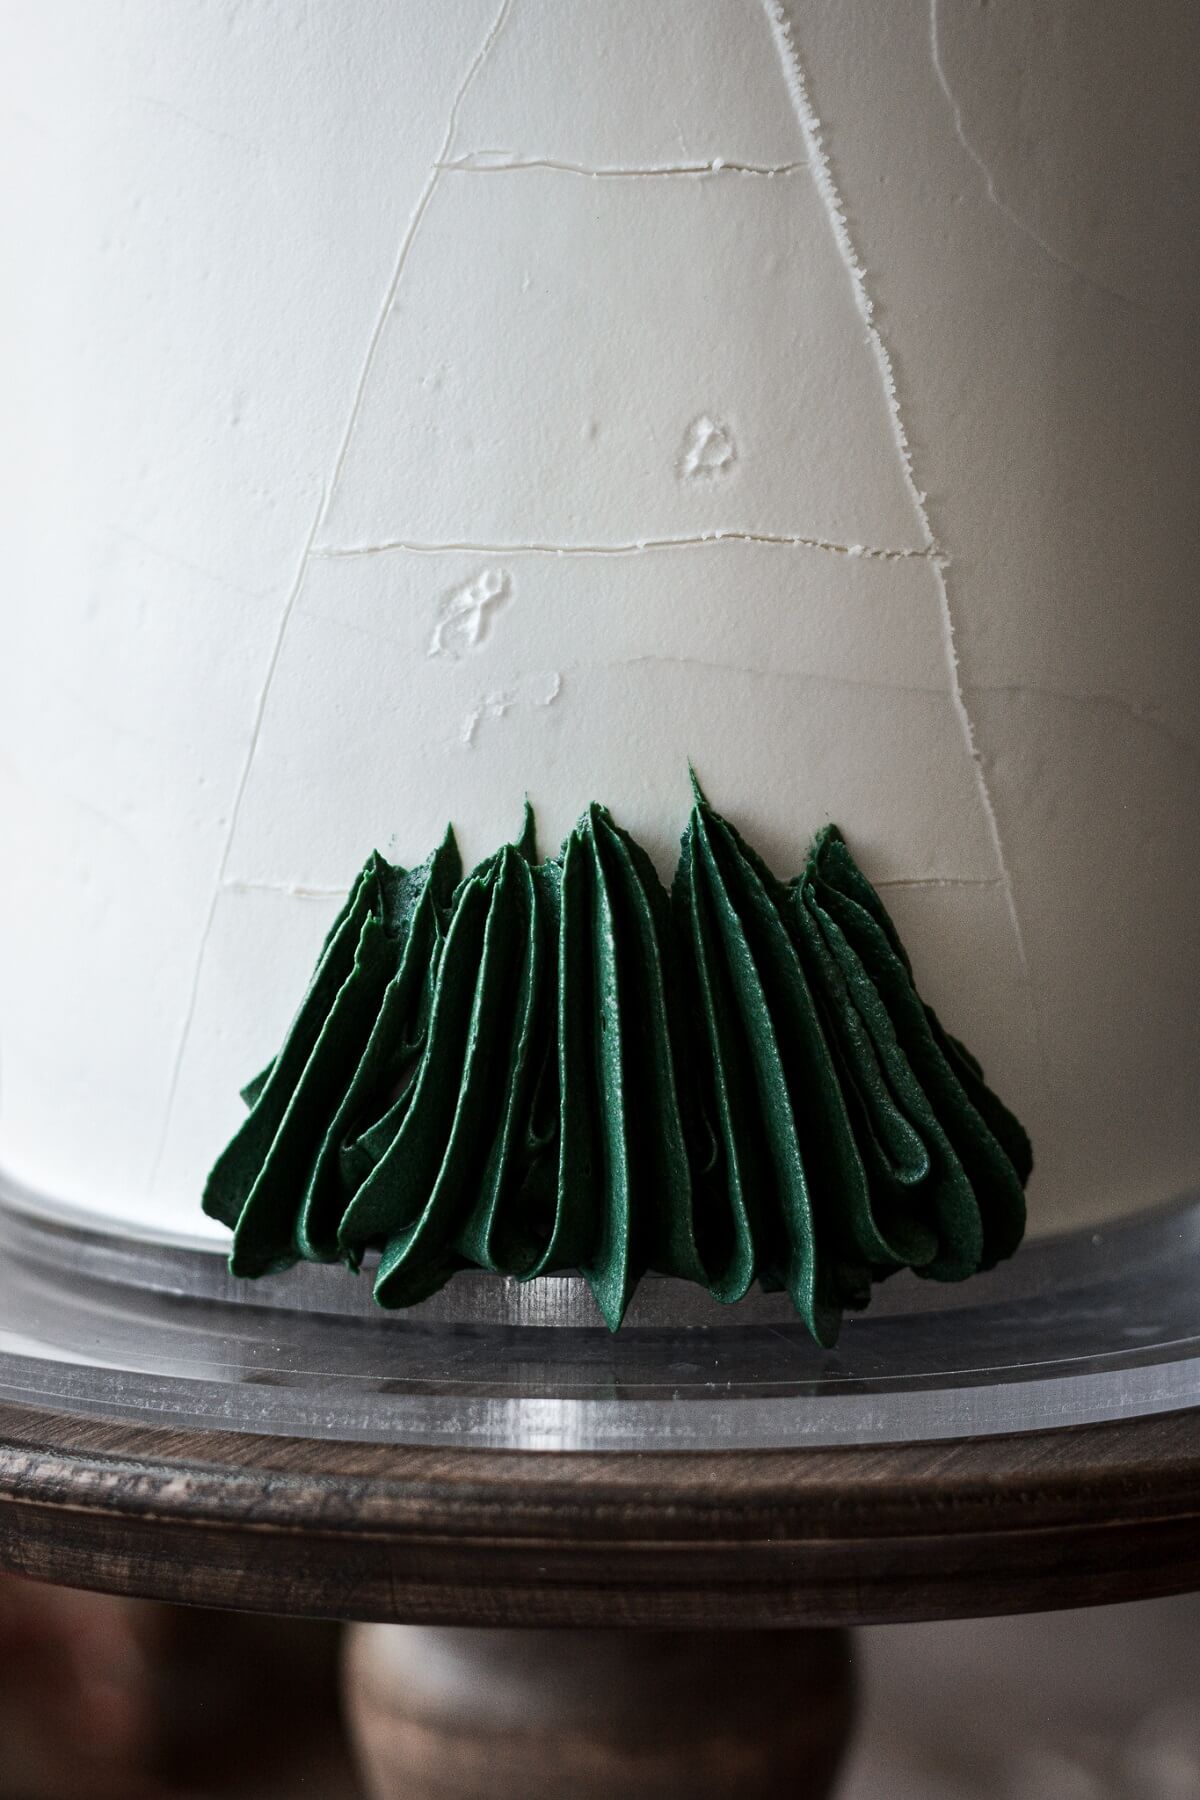 Step 4 for decorating a buttercream Christmas tree cake.